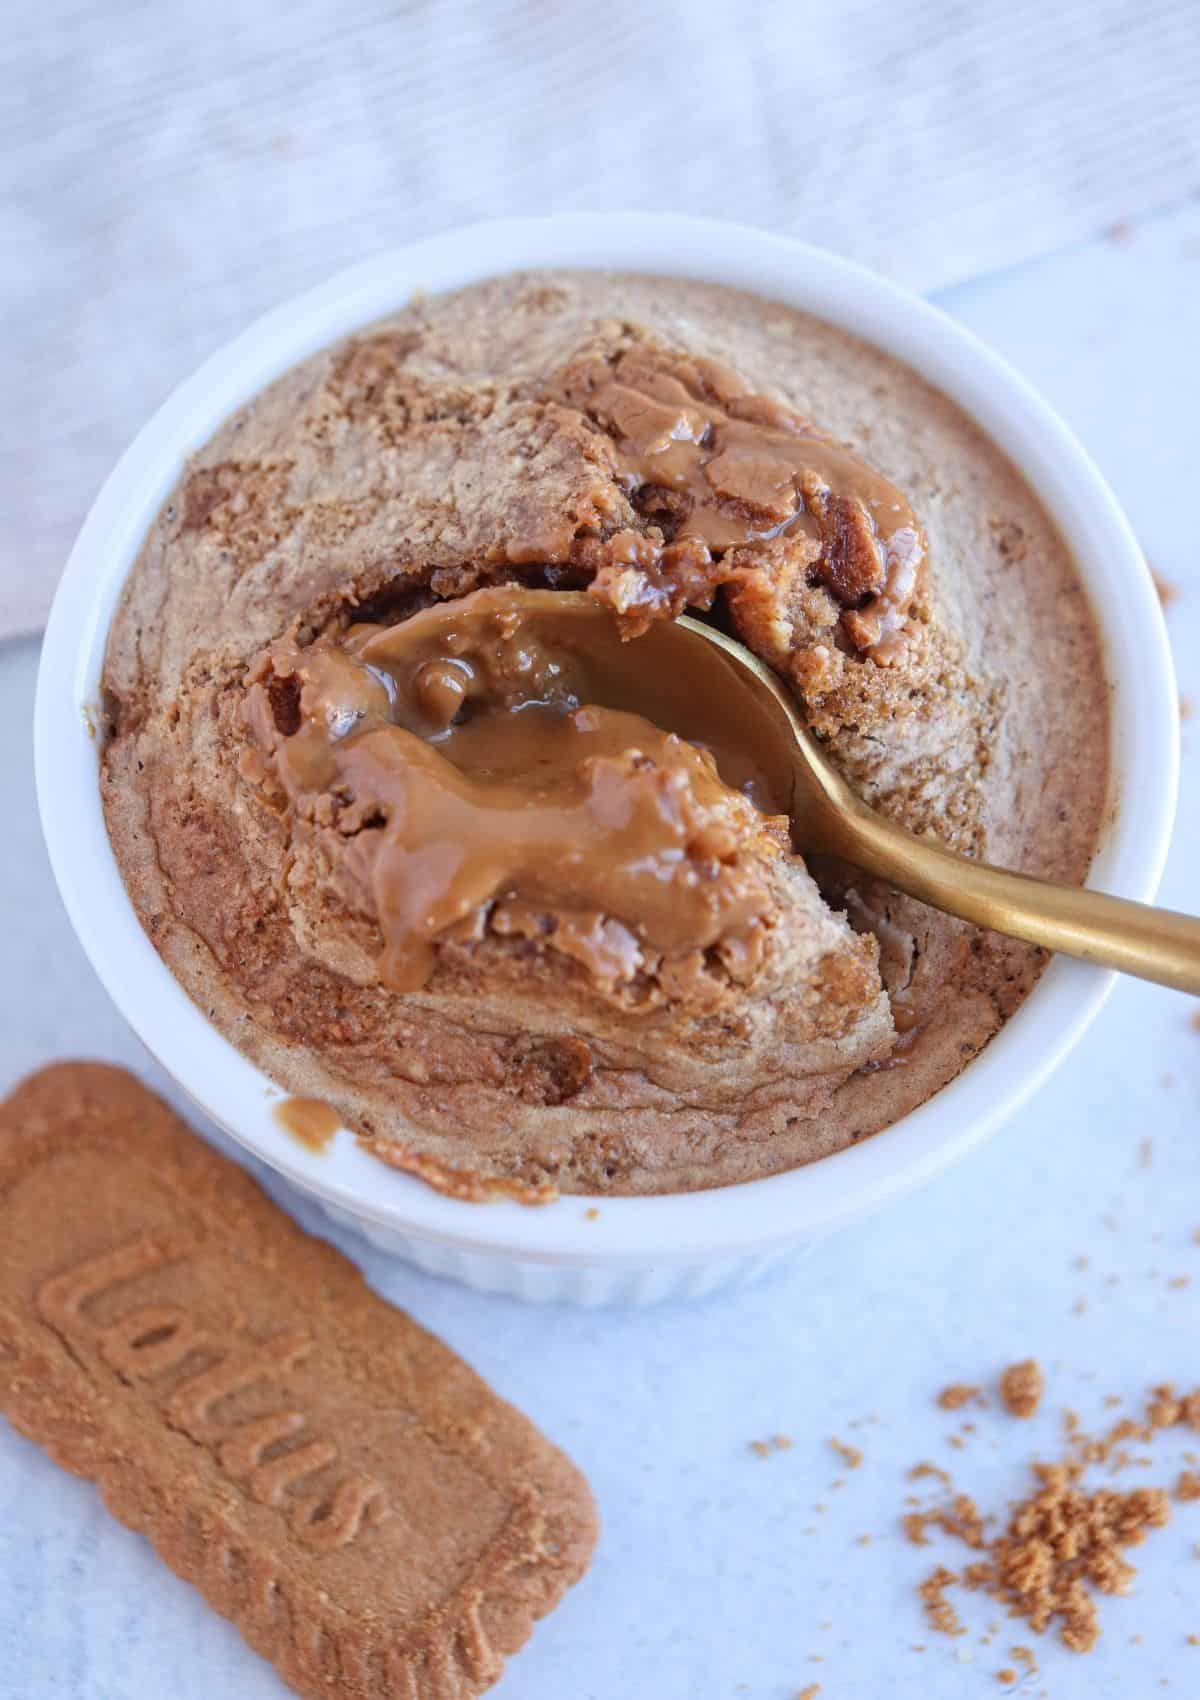 blended Biscoff baked oats in a white ramekin with a gold spoon.